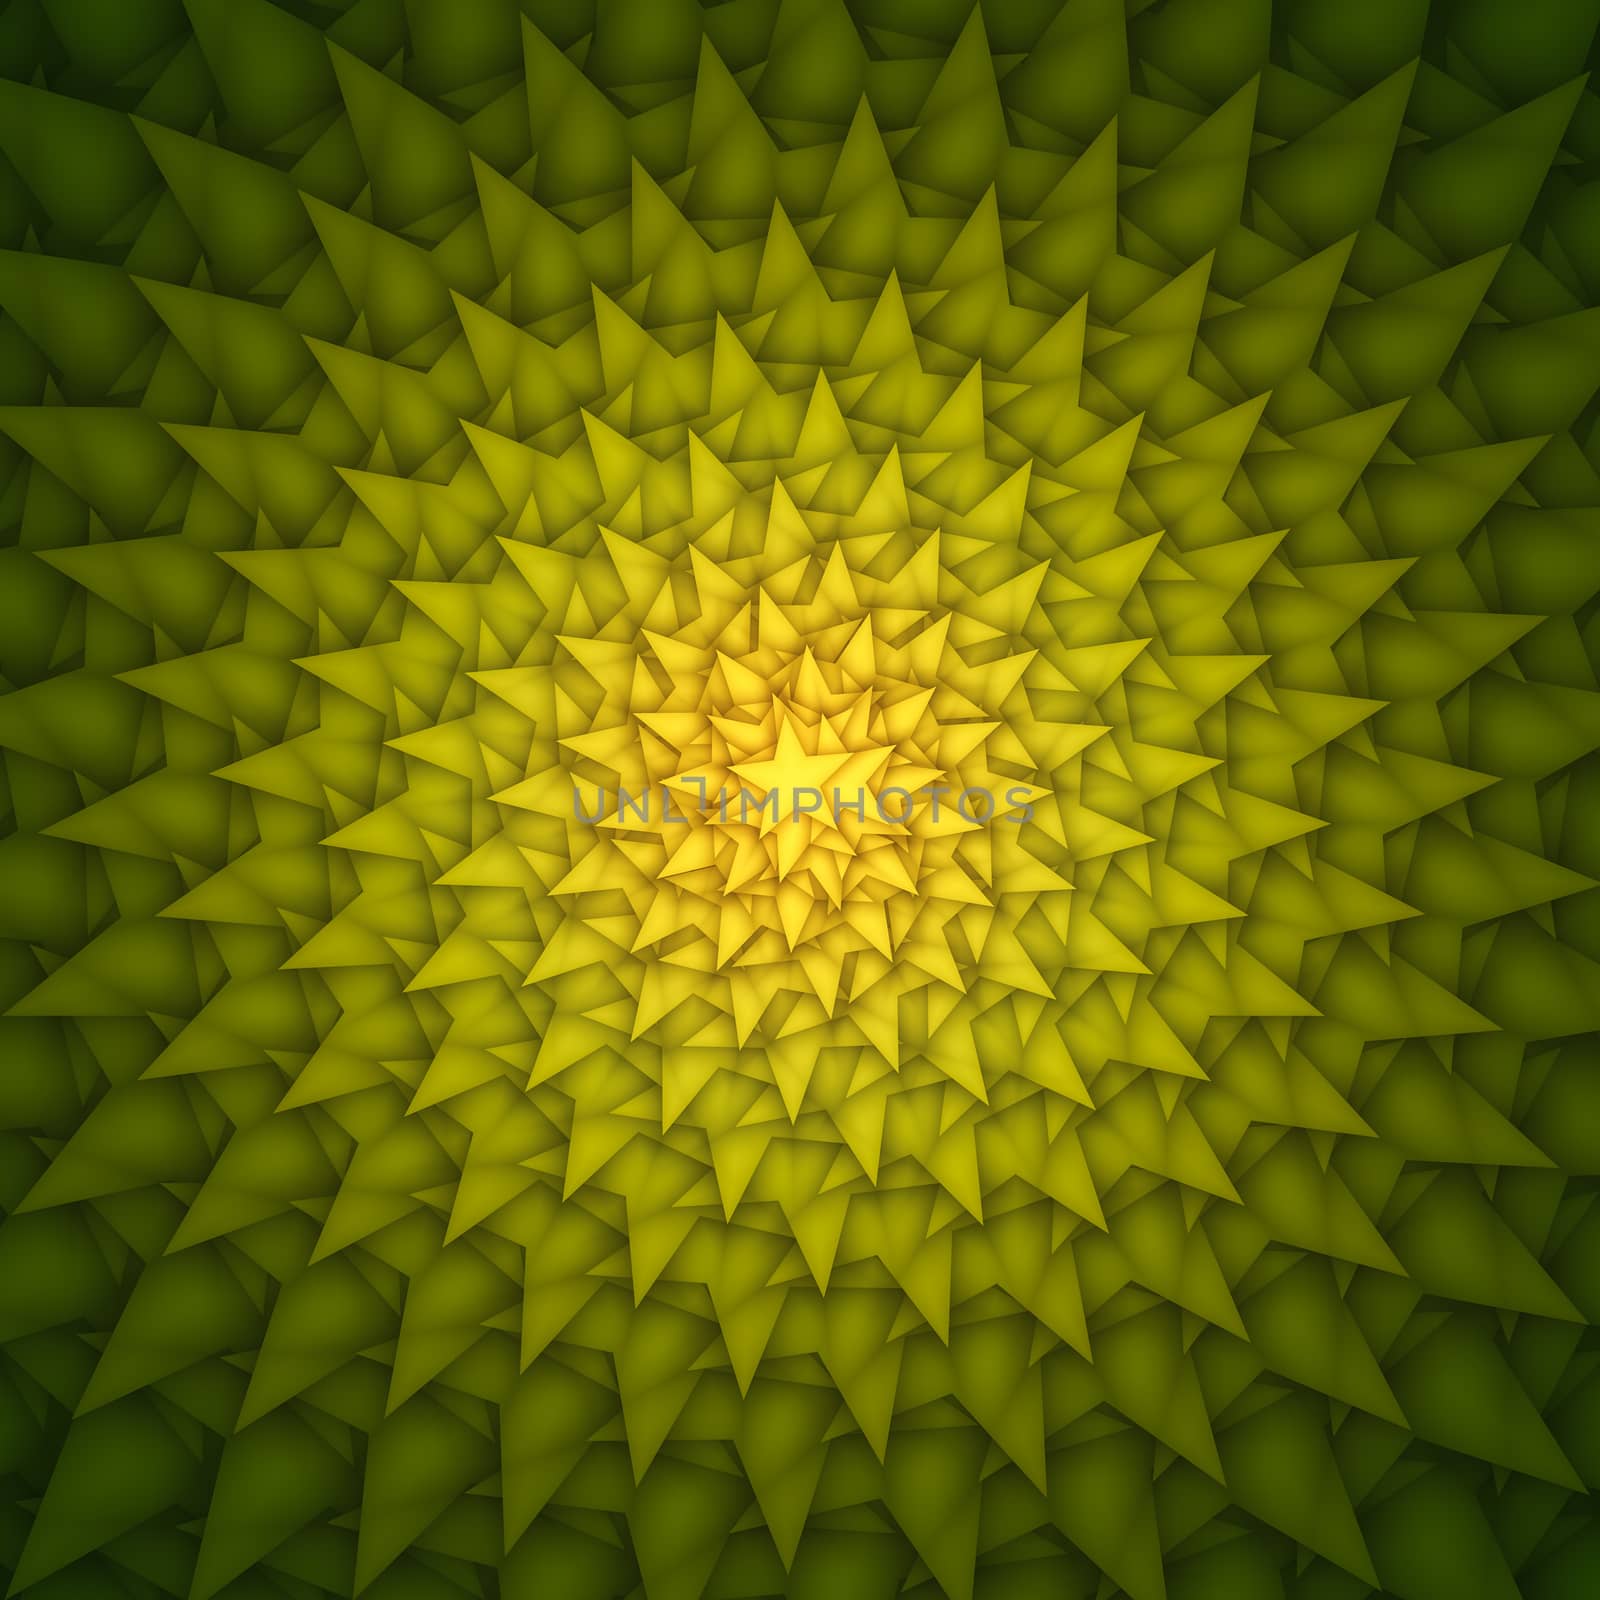 An illustration of a green yellow stars abstract background